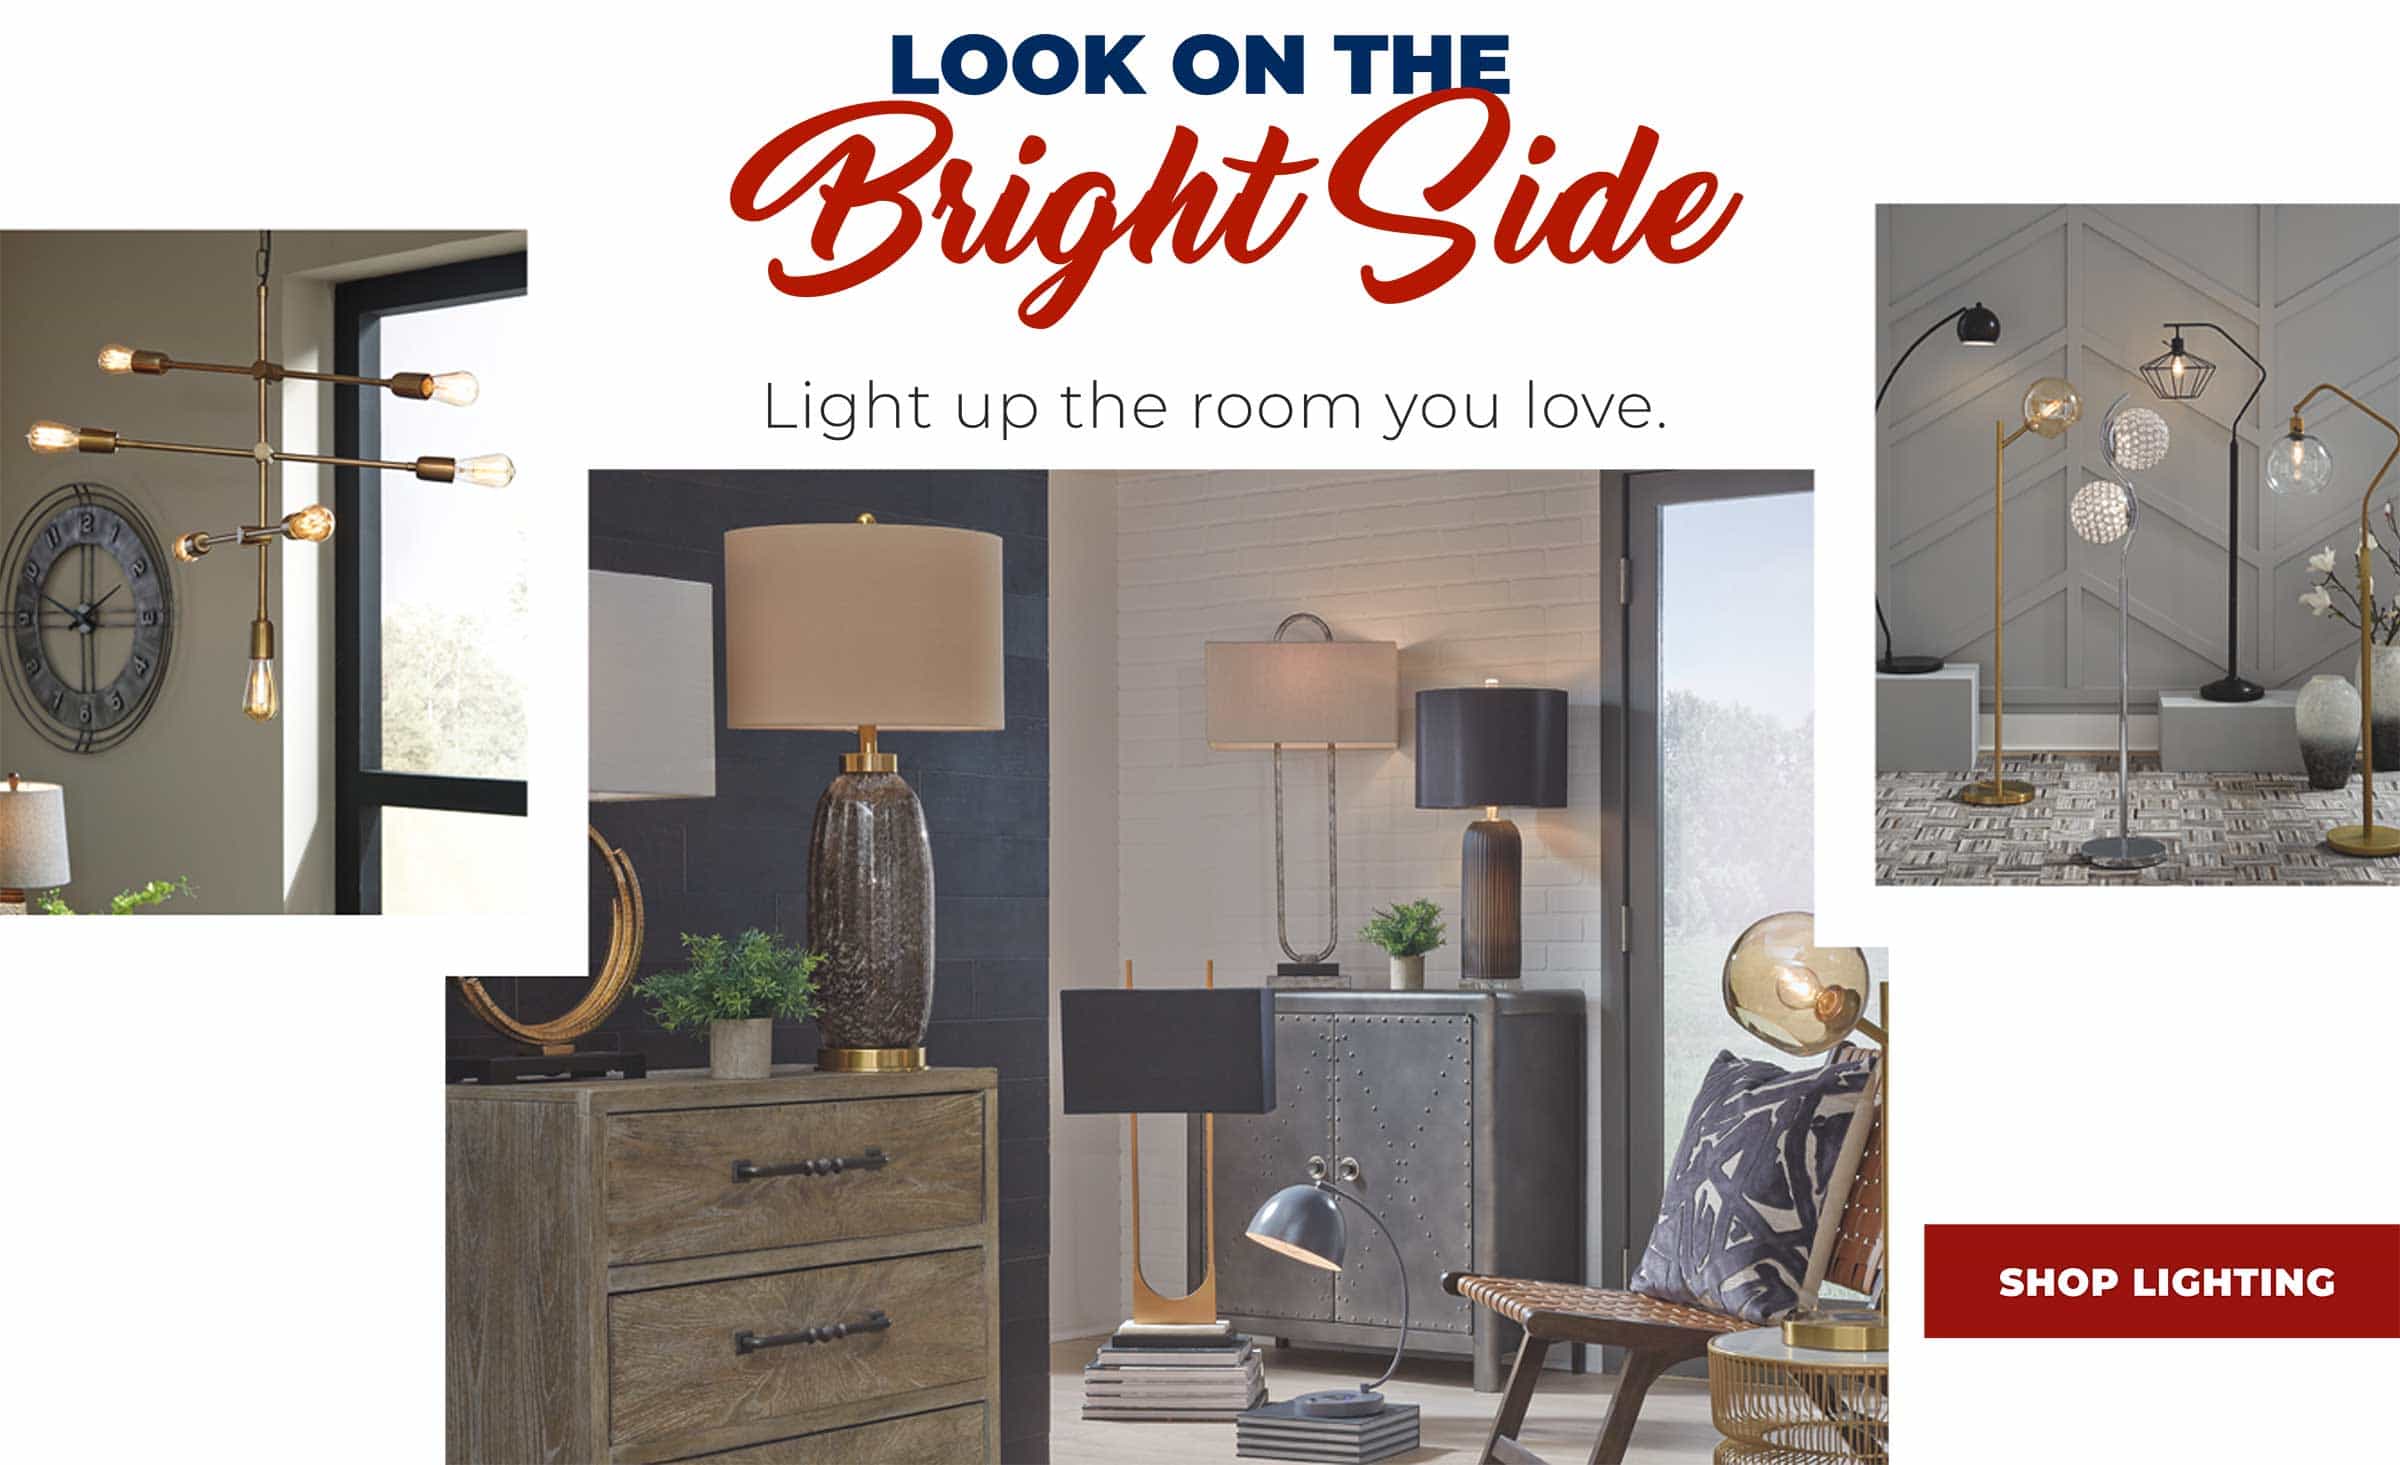 Look on the Bright Side - Shop Lighting